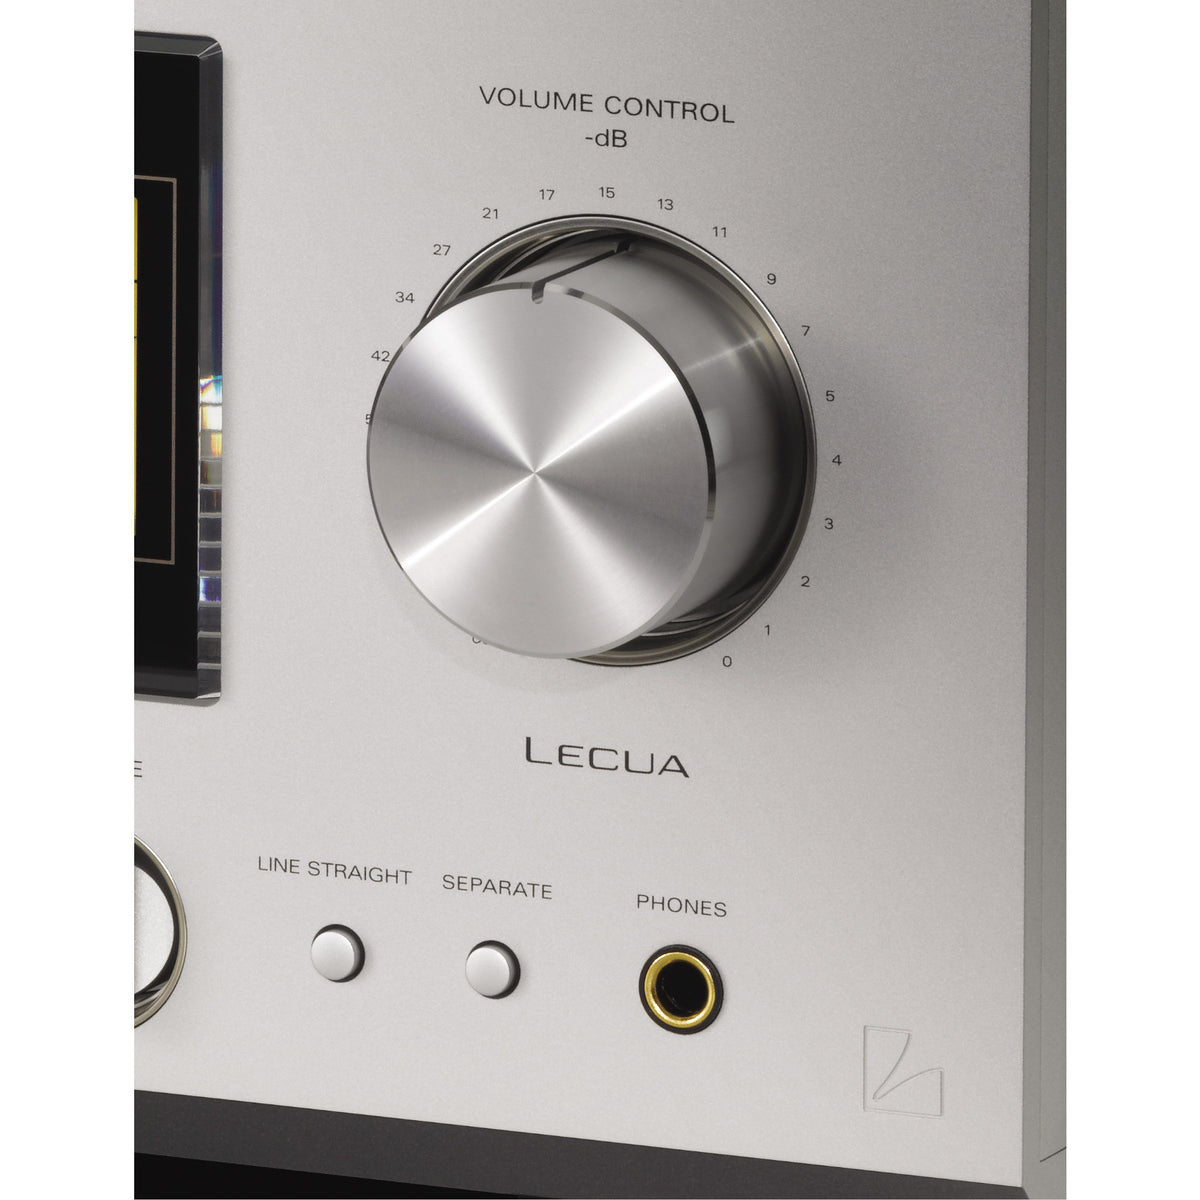 L-550AXII Class A Integrated Amplifier